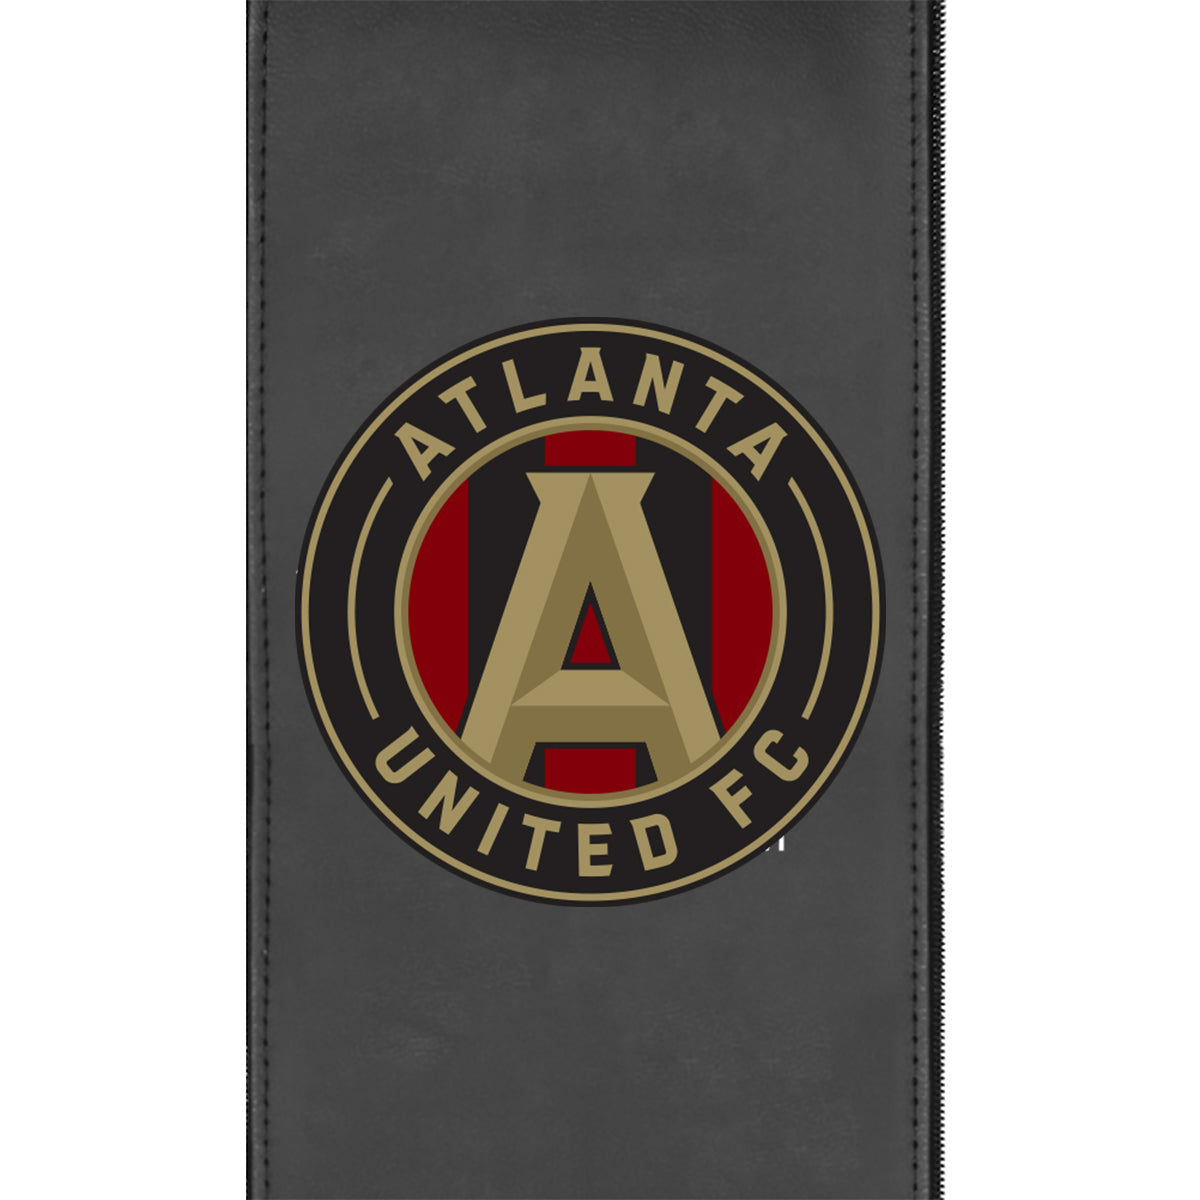 Relax Home Theater Recliner with Atlanta United FC Logo